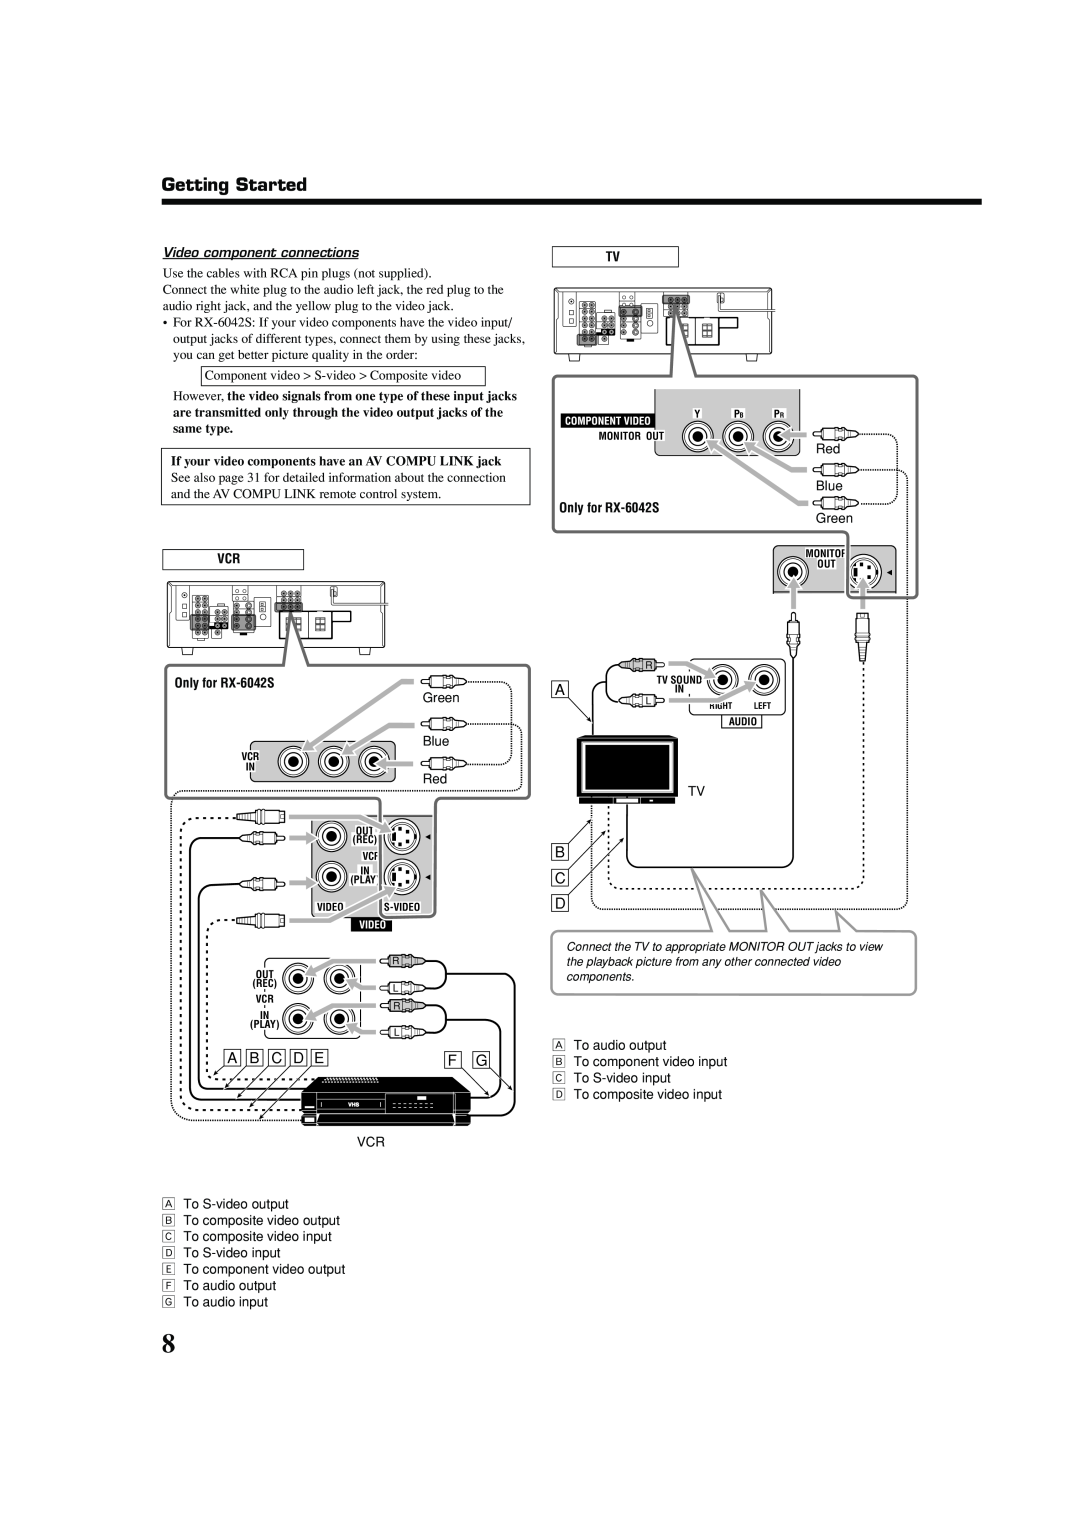 JVC 0404RYMMDWJEIN, LVT1140-007A manual A B C D E, Getting Started, Video component connections 